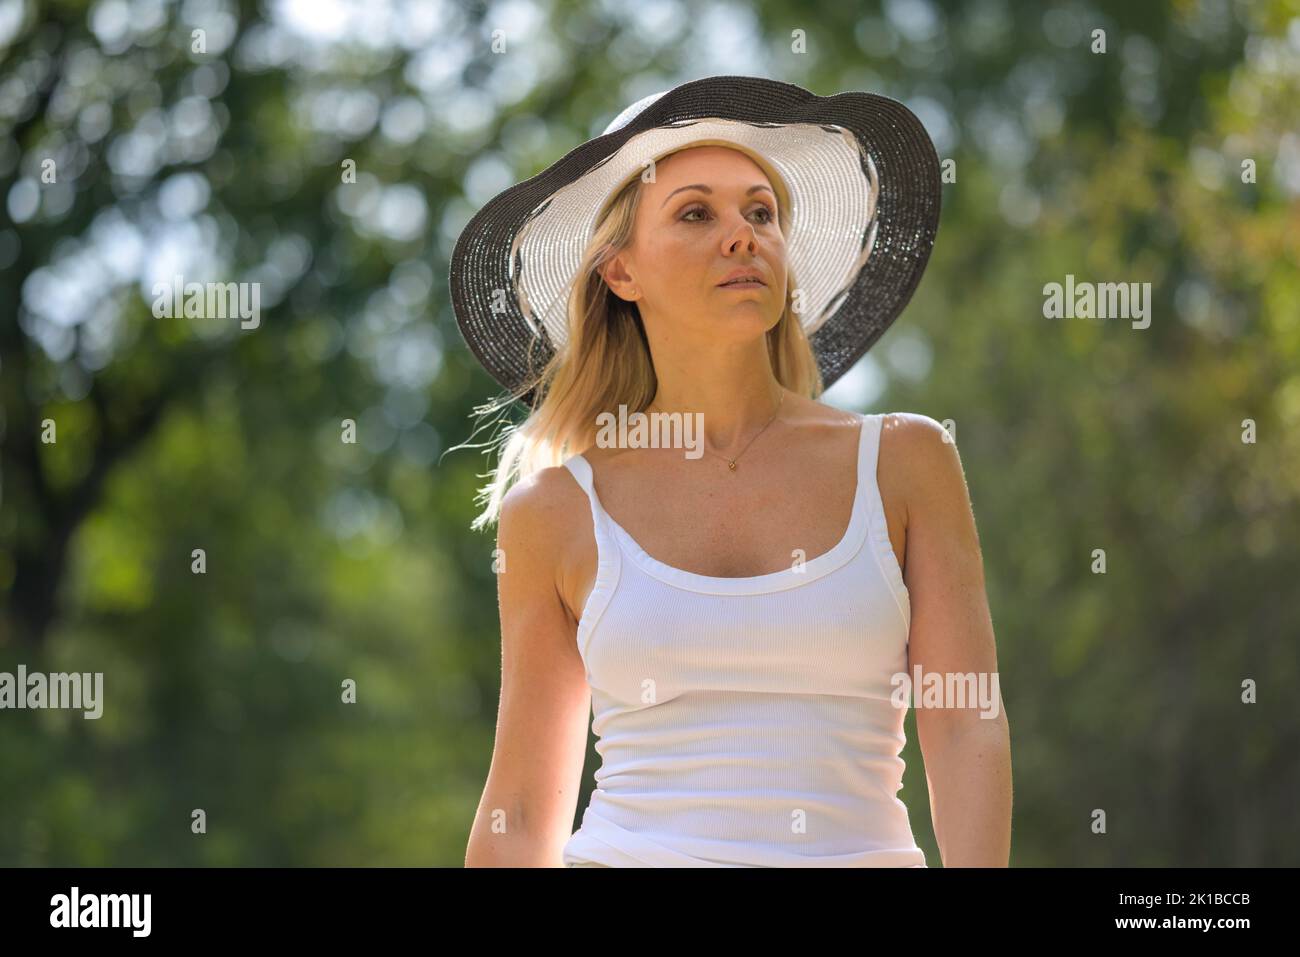 Attractive blonde woman wearing a black and white summer hat in a white top is walking along a path with green trees in the background looking aside Stock Photo